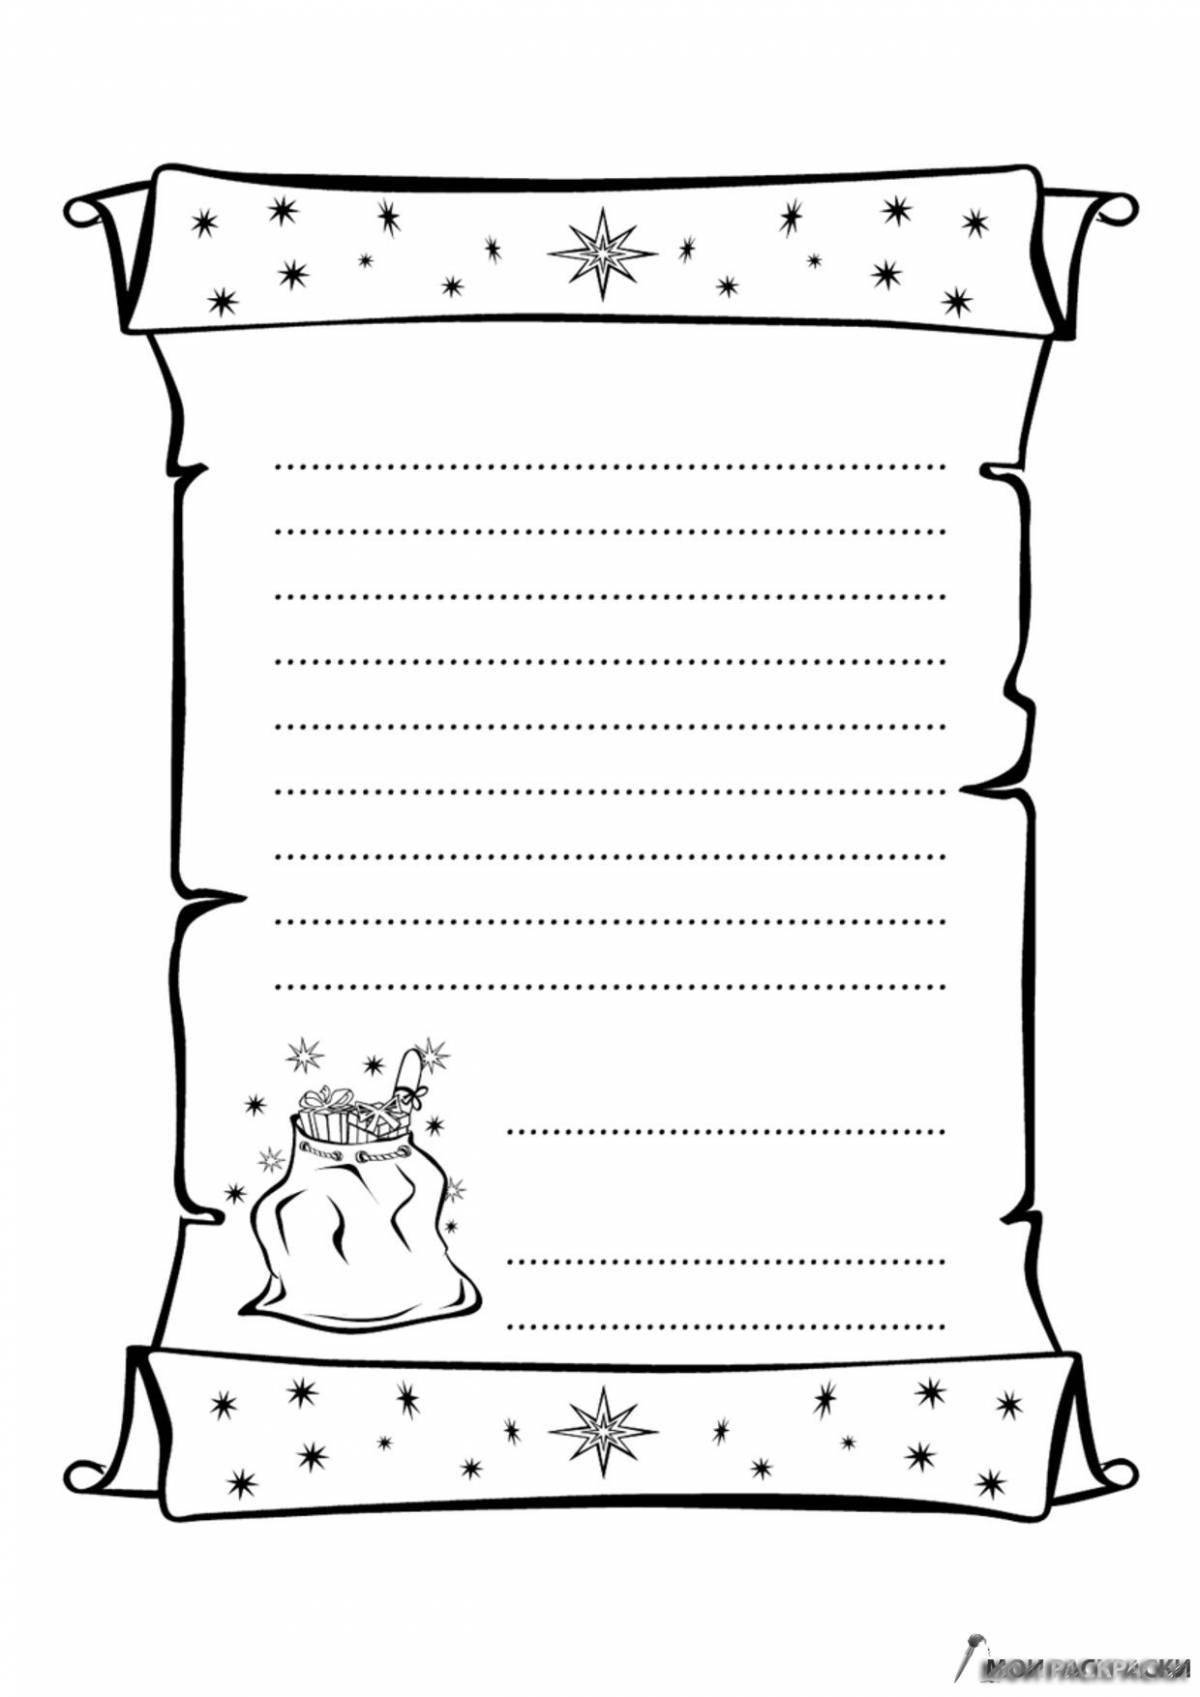 Decorated coloring letter to santa claus template